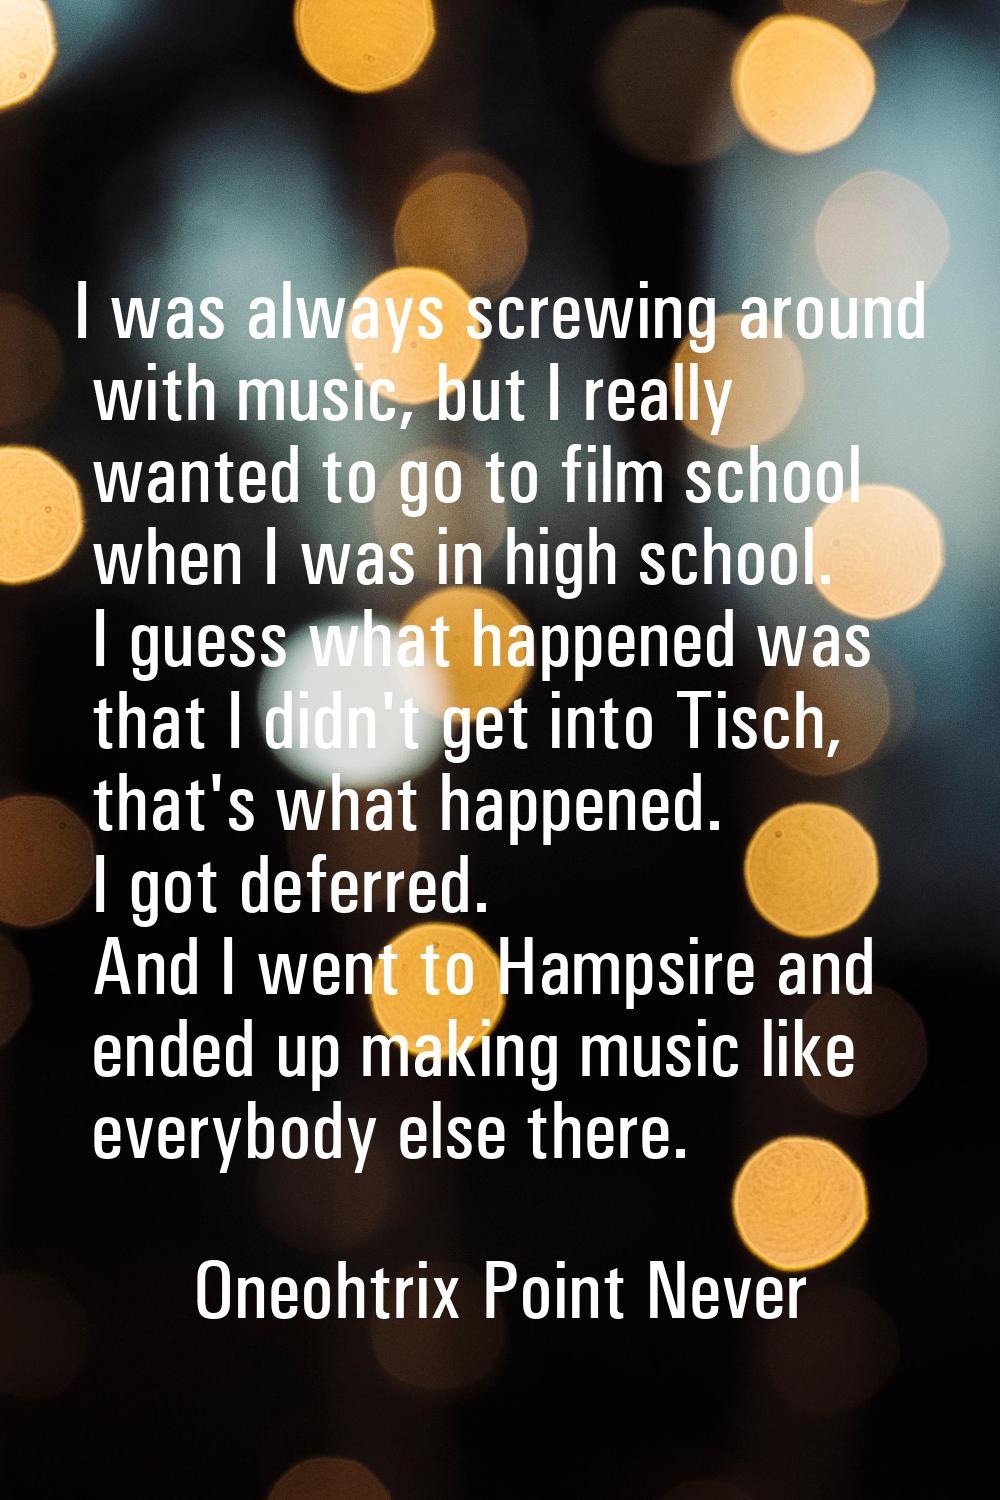 I was always screwing around with music, but I really wanted to go to film school when I was in hig